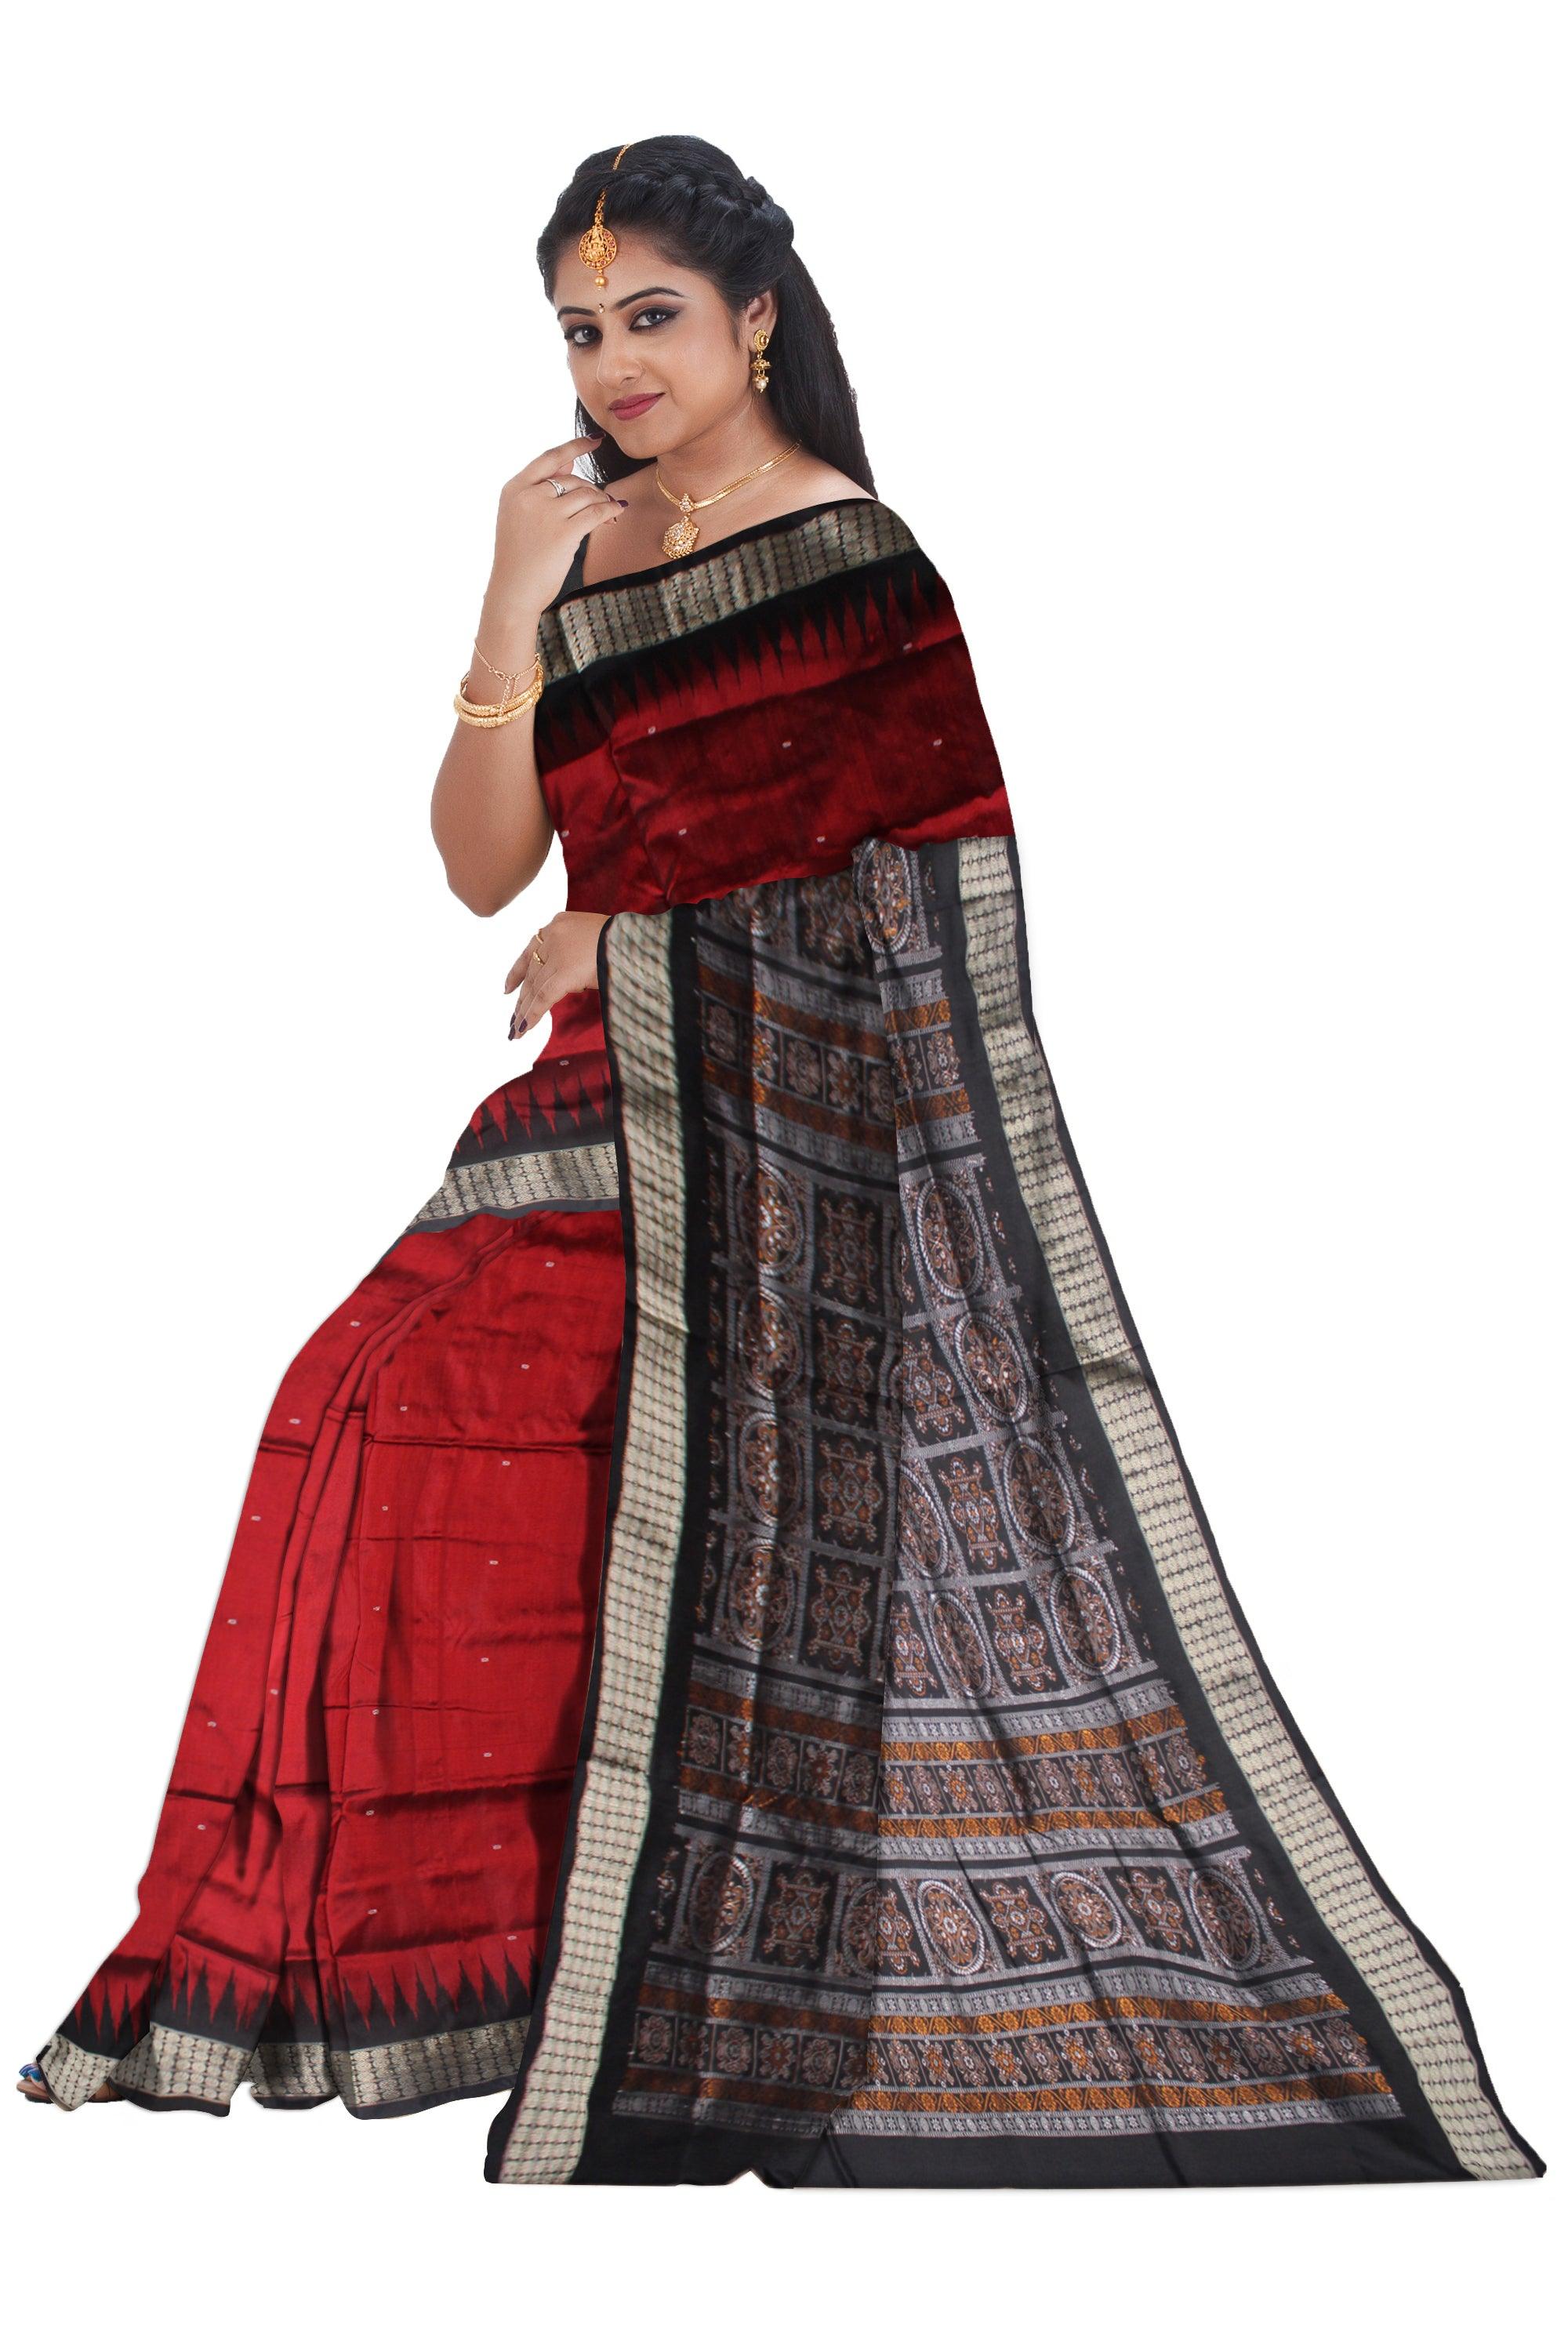 MAROON AND BLACK COLOR BOOTY PATTERN PATA SAREE, WITH PALLU NEW DESIGN BOMKEI PATTERN, AVAILABLE WITH BLOUSE PIECE. - Koshali Arts & Crafts Enterprise